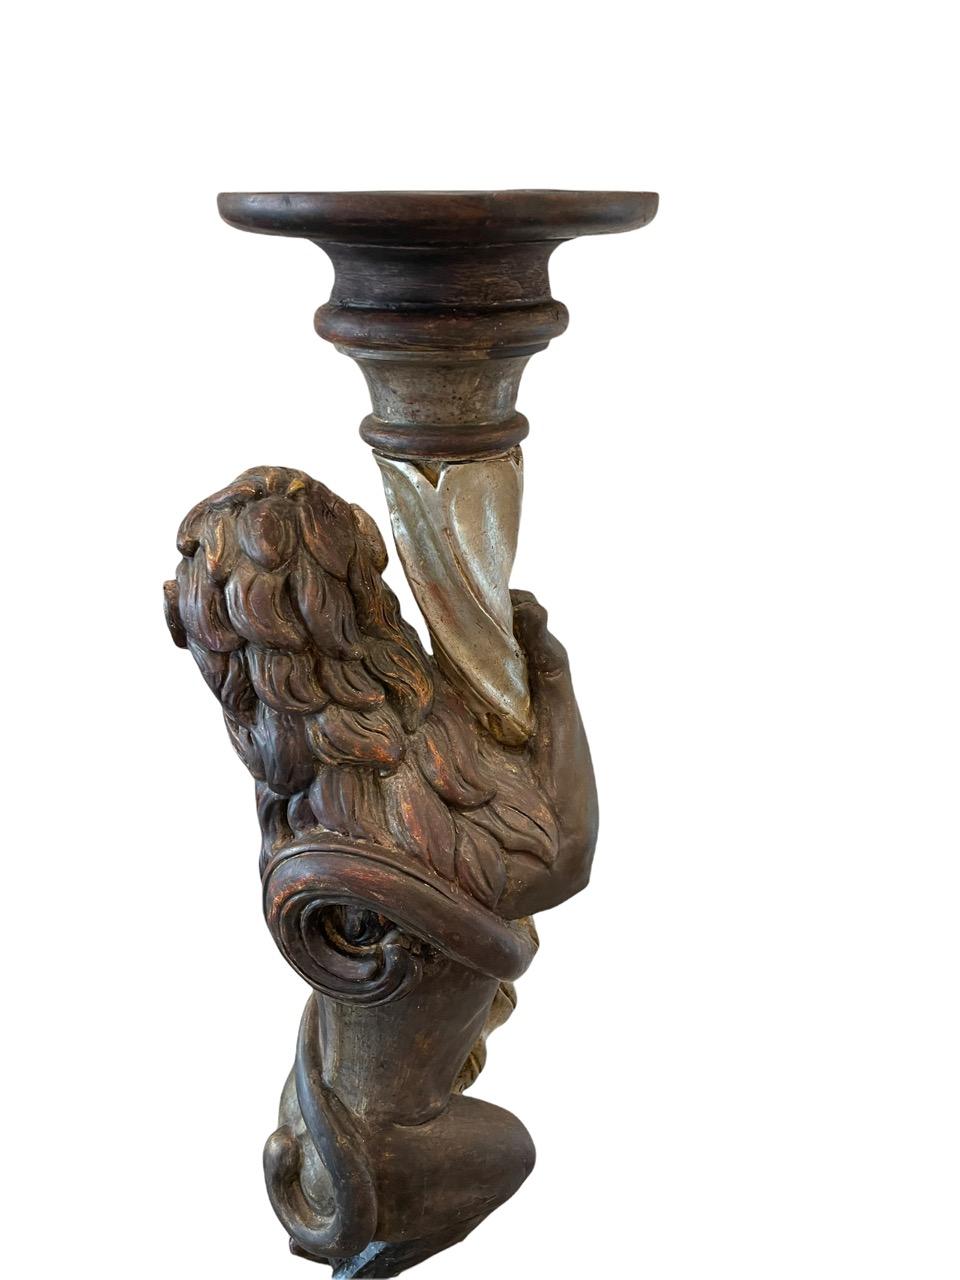 19th Century Russian Empire Carved Wood Candle Holder Sculpture For Sale 12